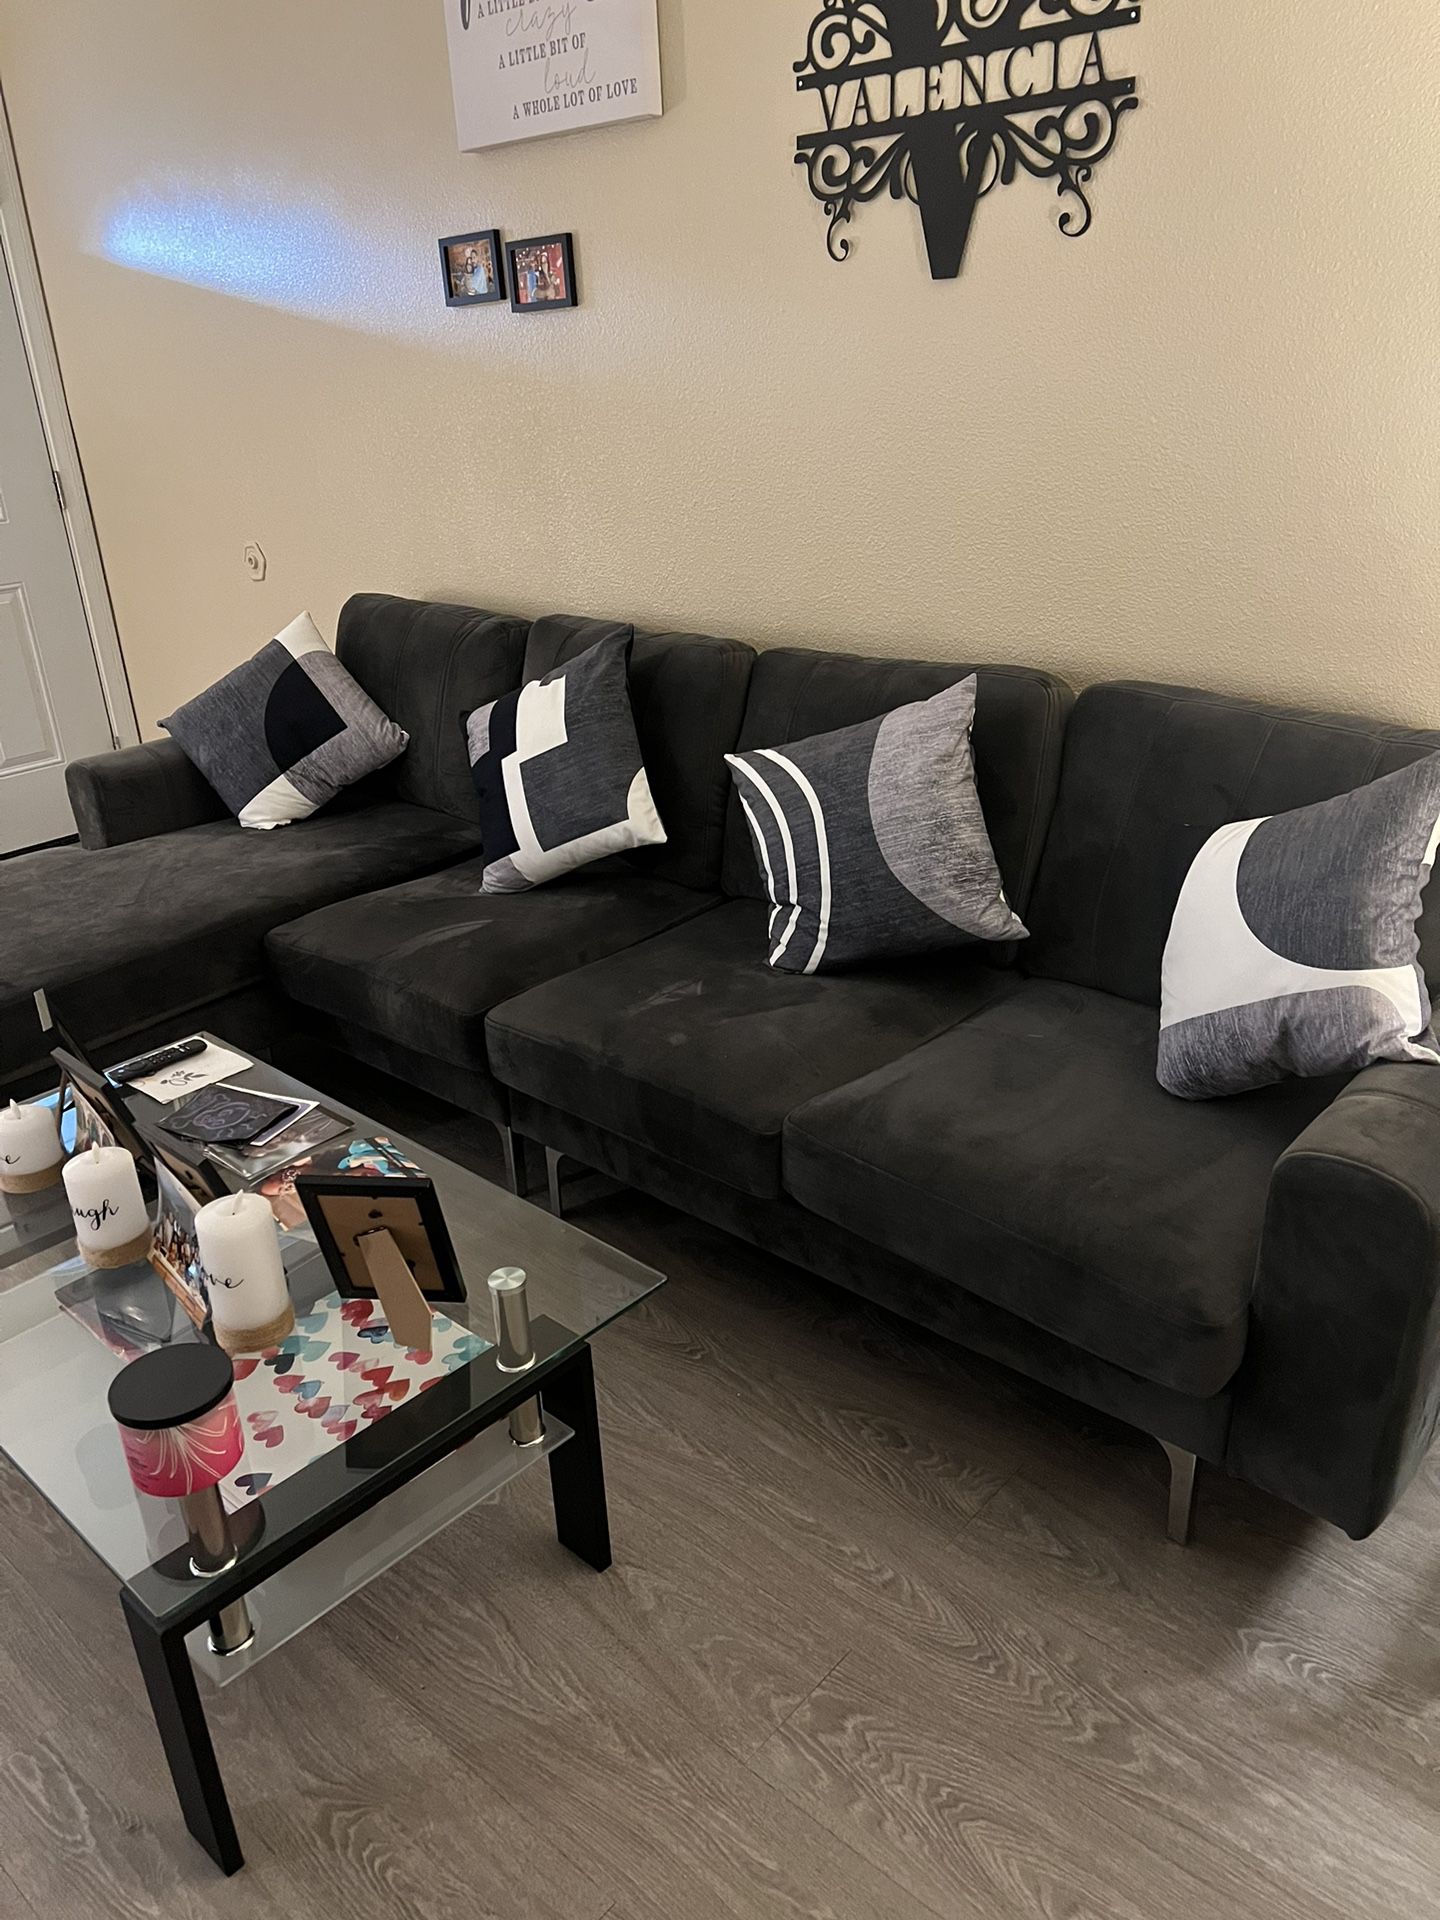 Living Room Set (With Coffee Table & 2 End Tables)